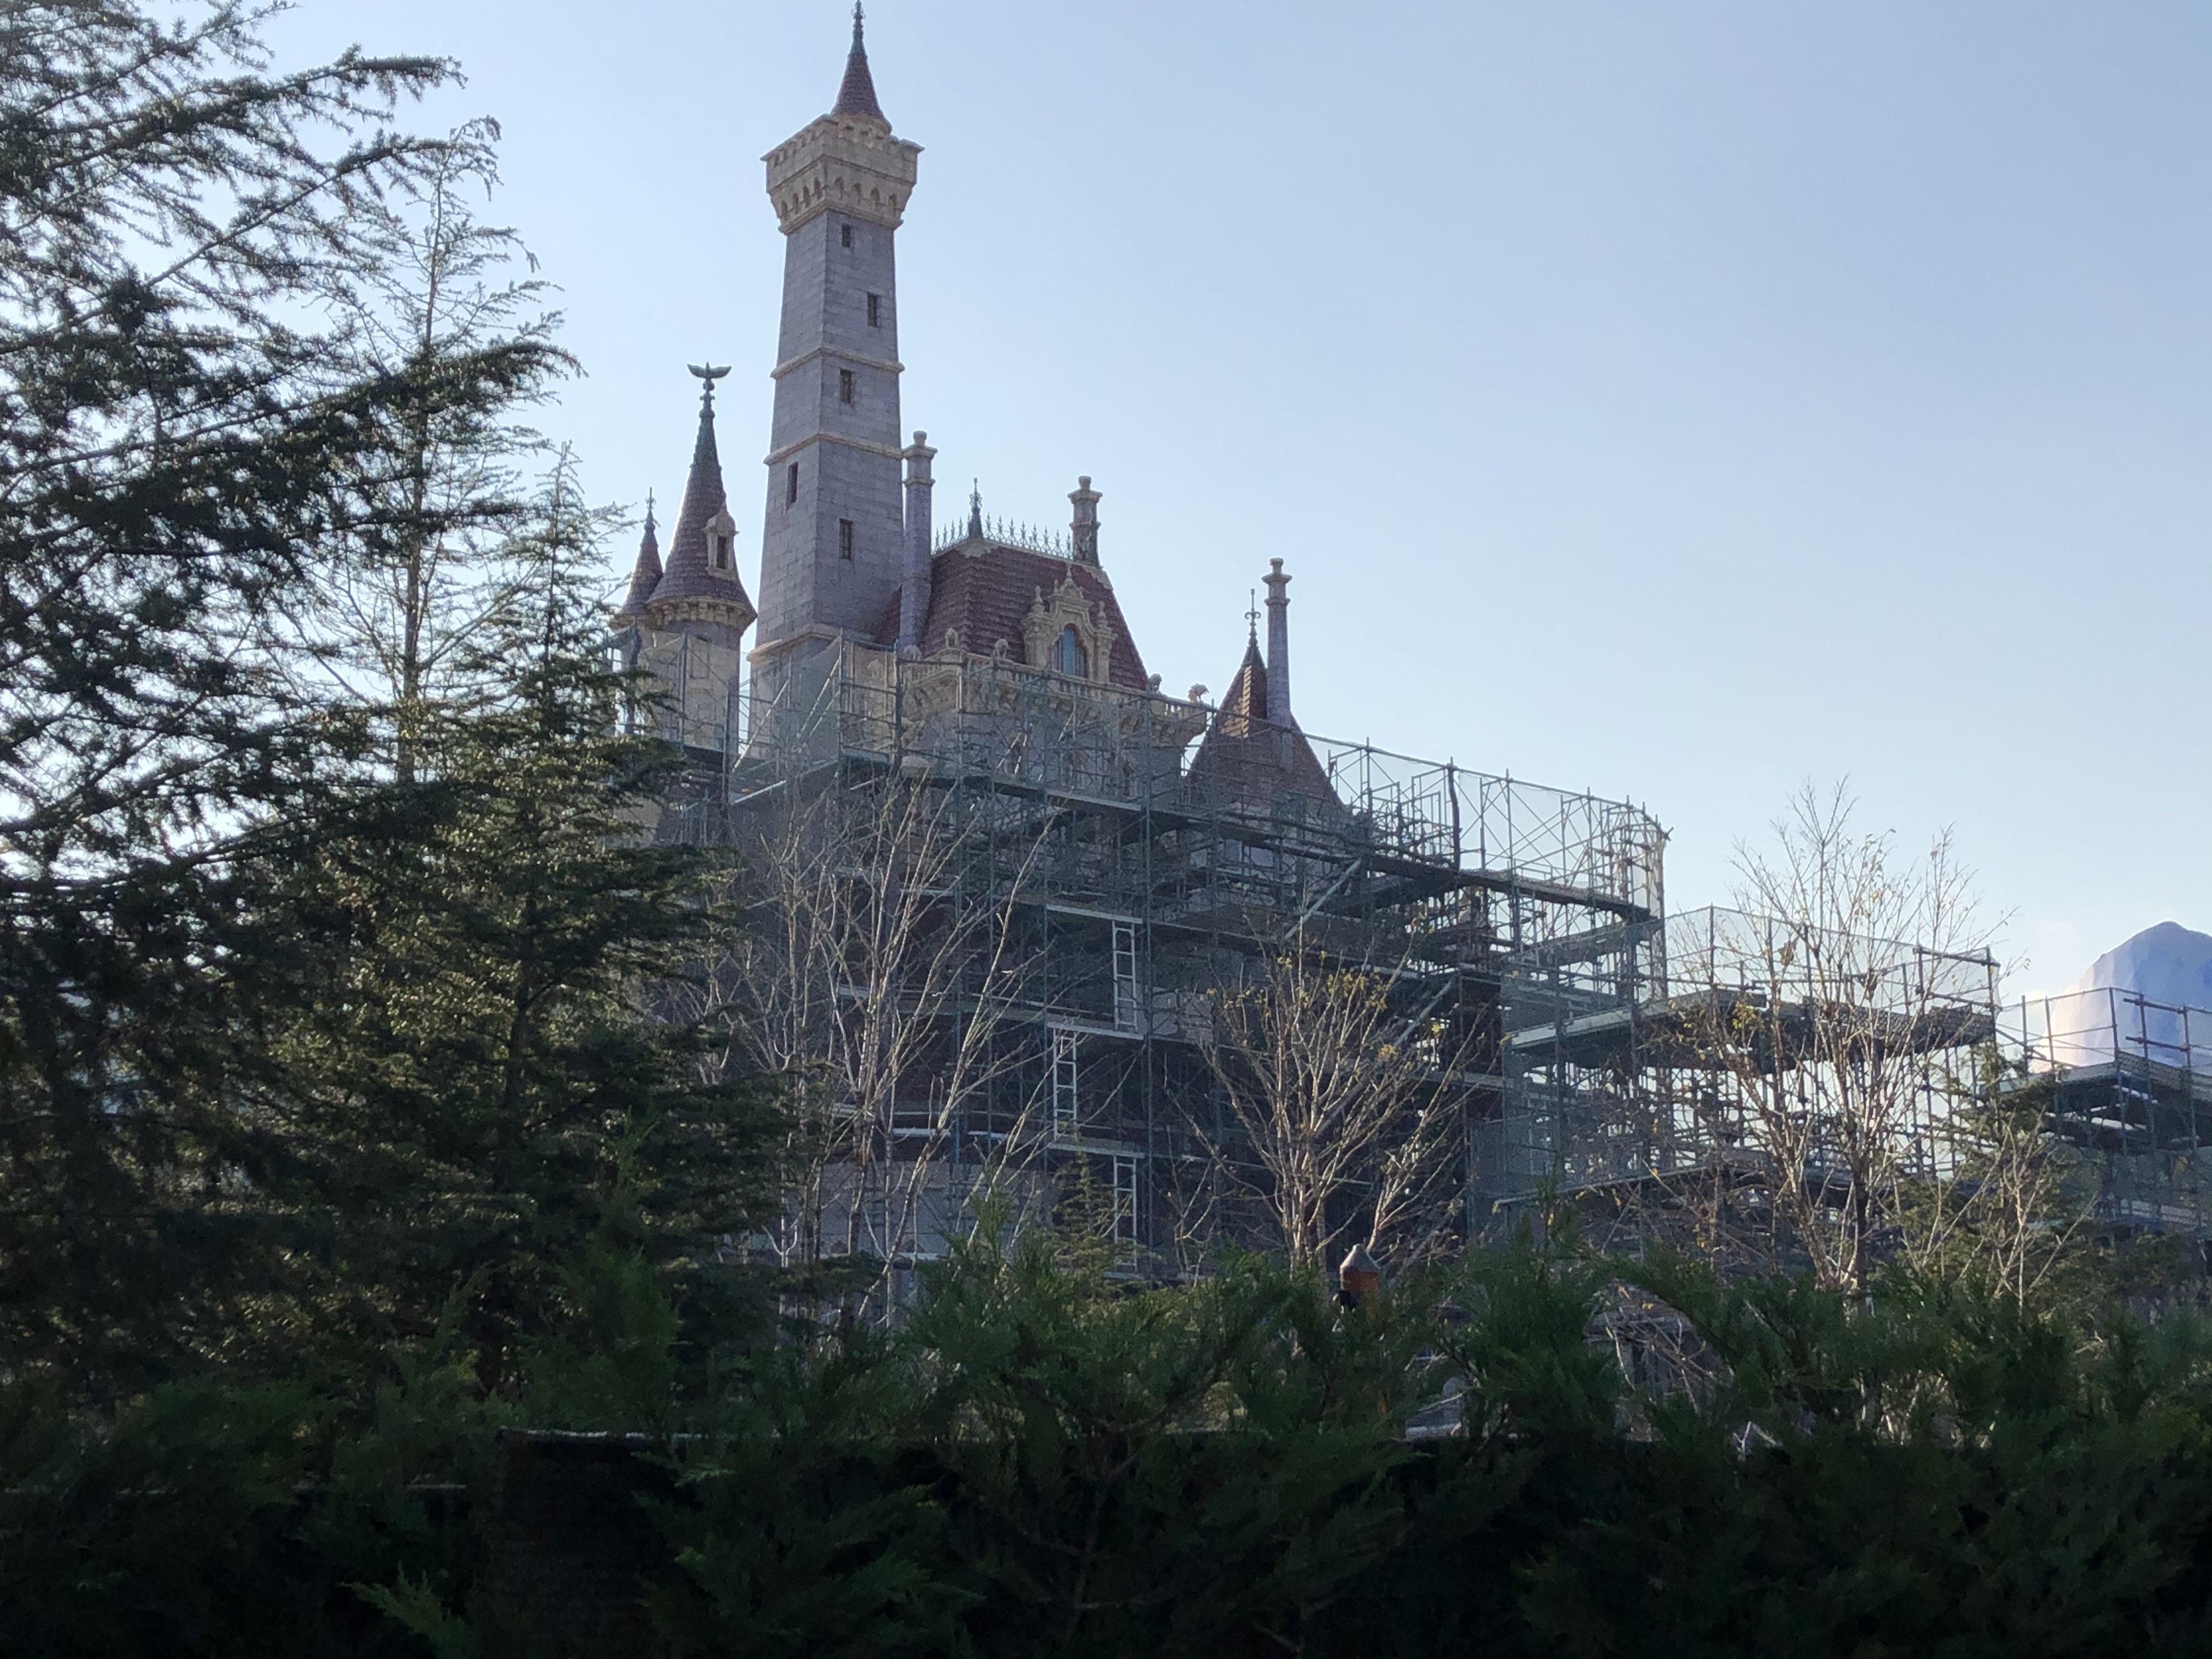 Photos More Progress On The Enchanted Tale Of Beauty And The Beast New Fantasyland At Tokyo Disneyland 12 18 19 Wdw News Today